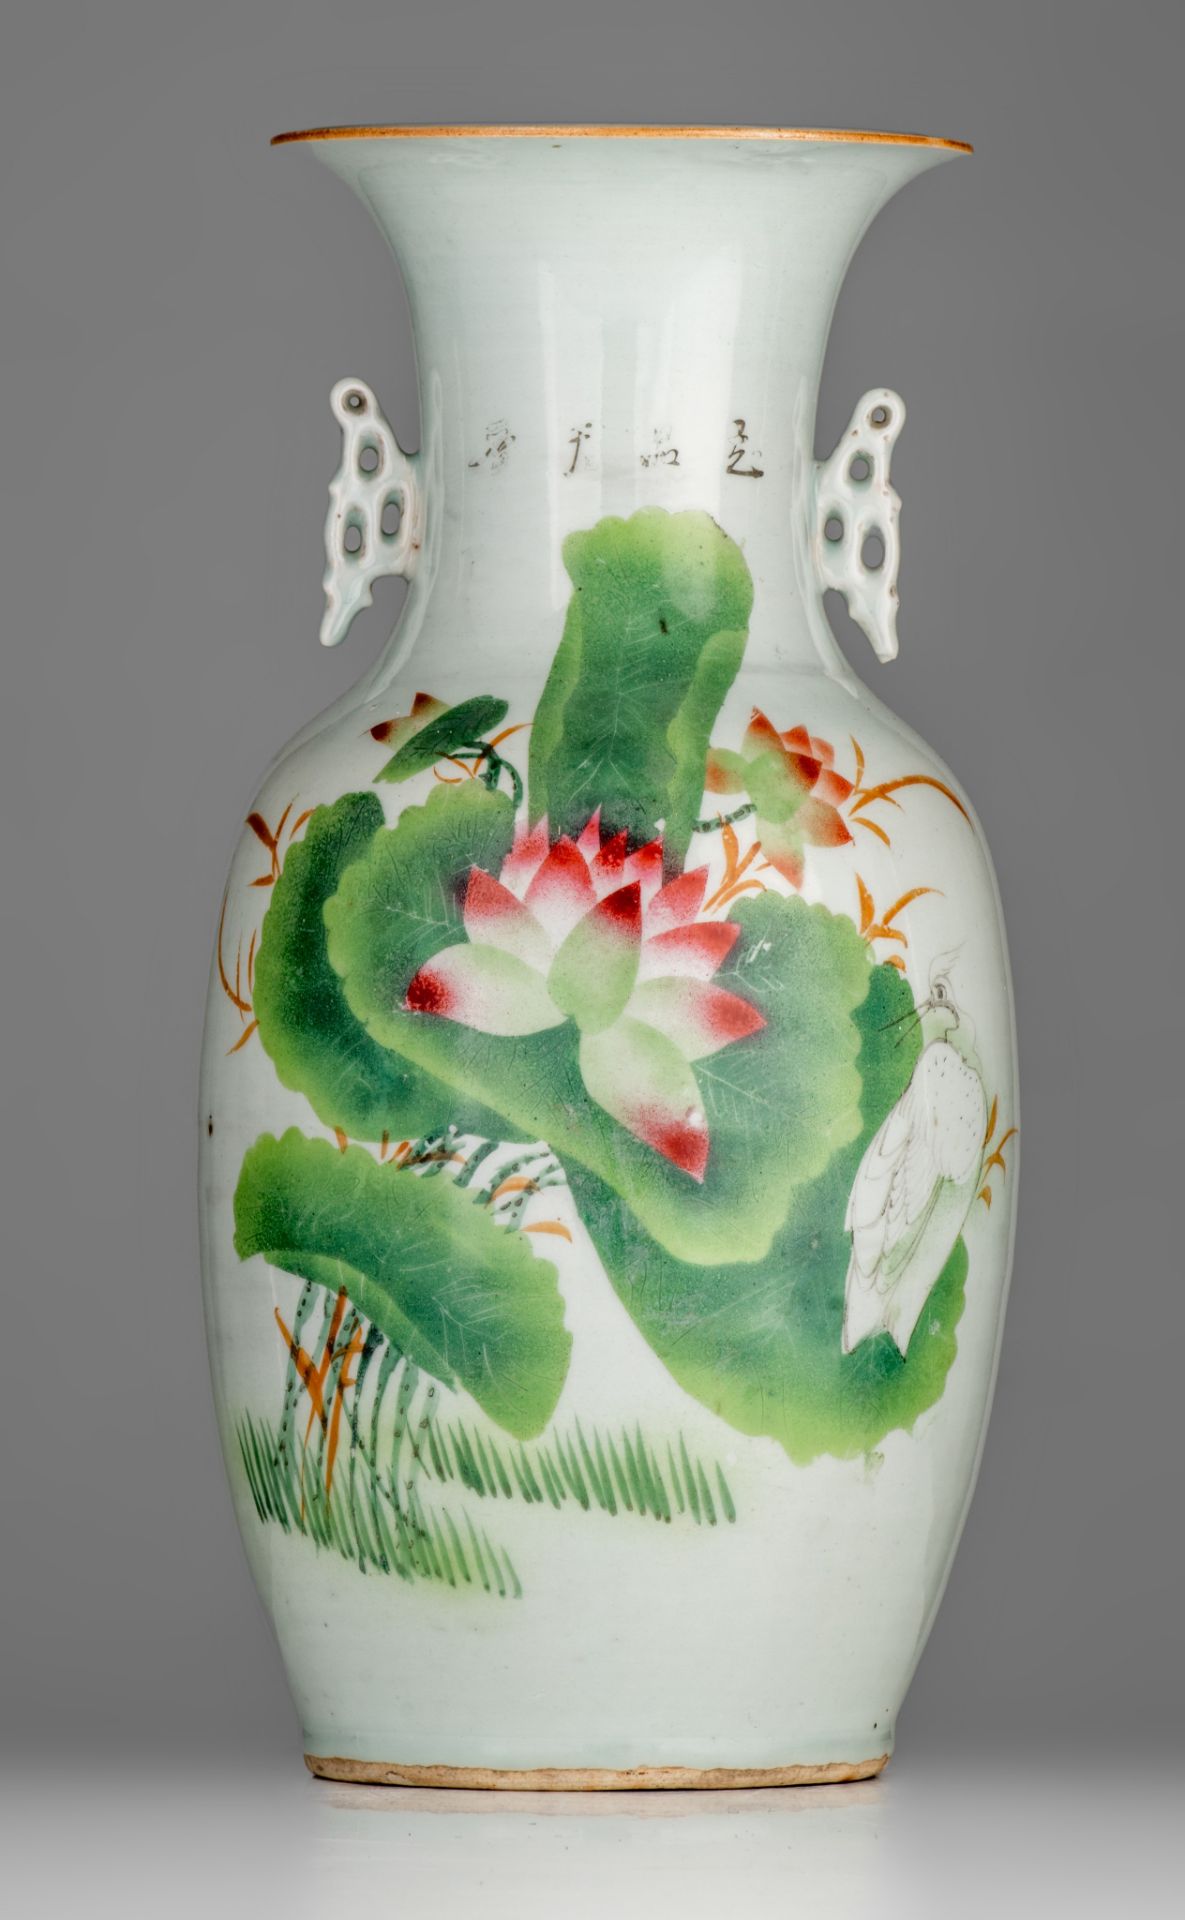 Four Chinese famille rose vases, some with a signed text, 19thC and Republic period, H 42,5 - 43,5 c - Bild 8 aus 20